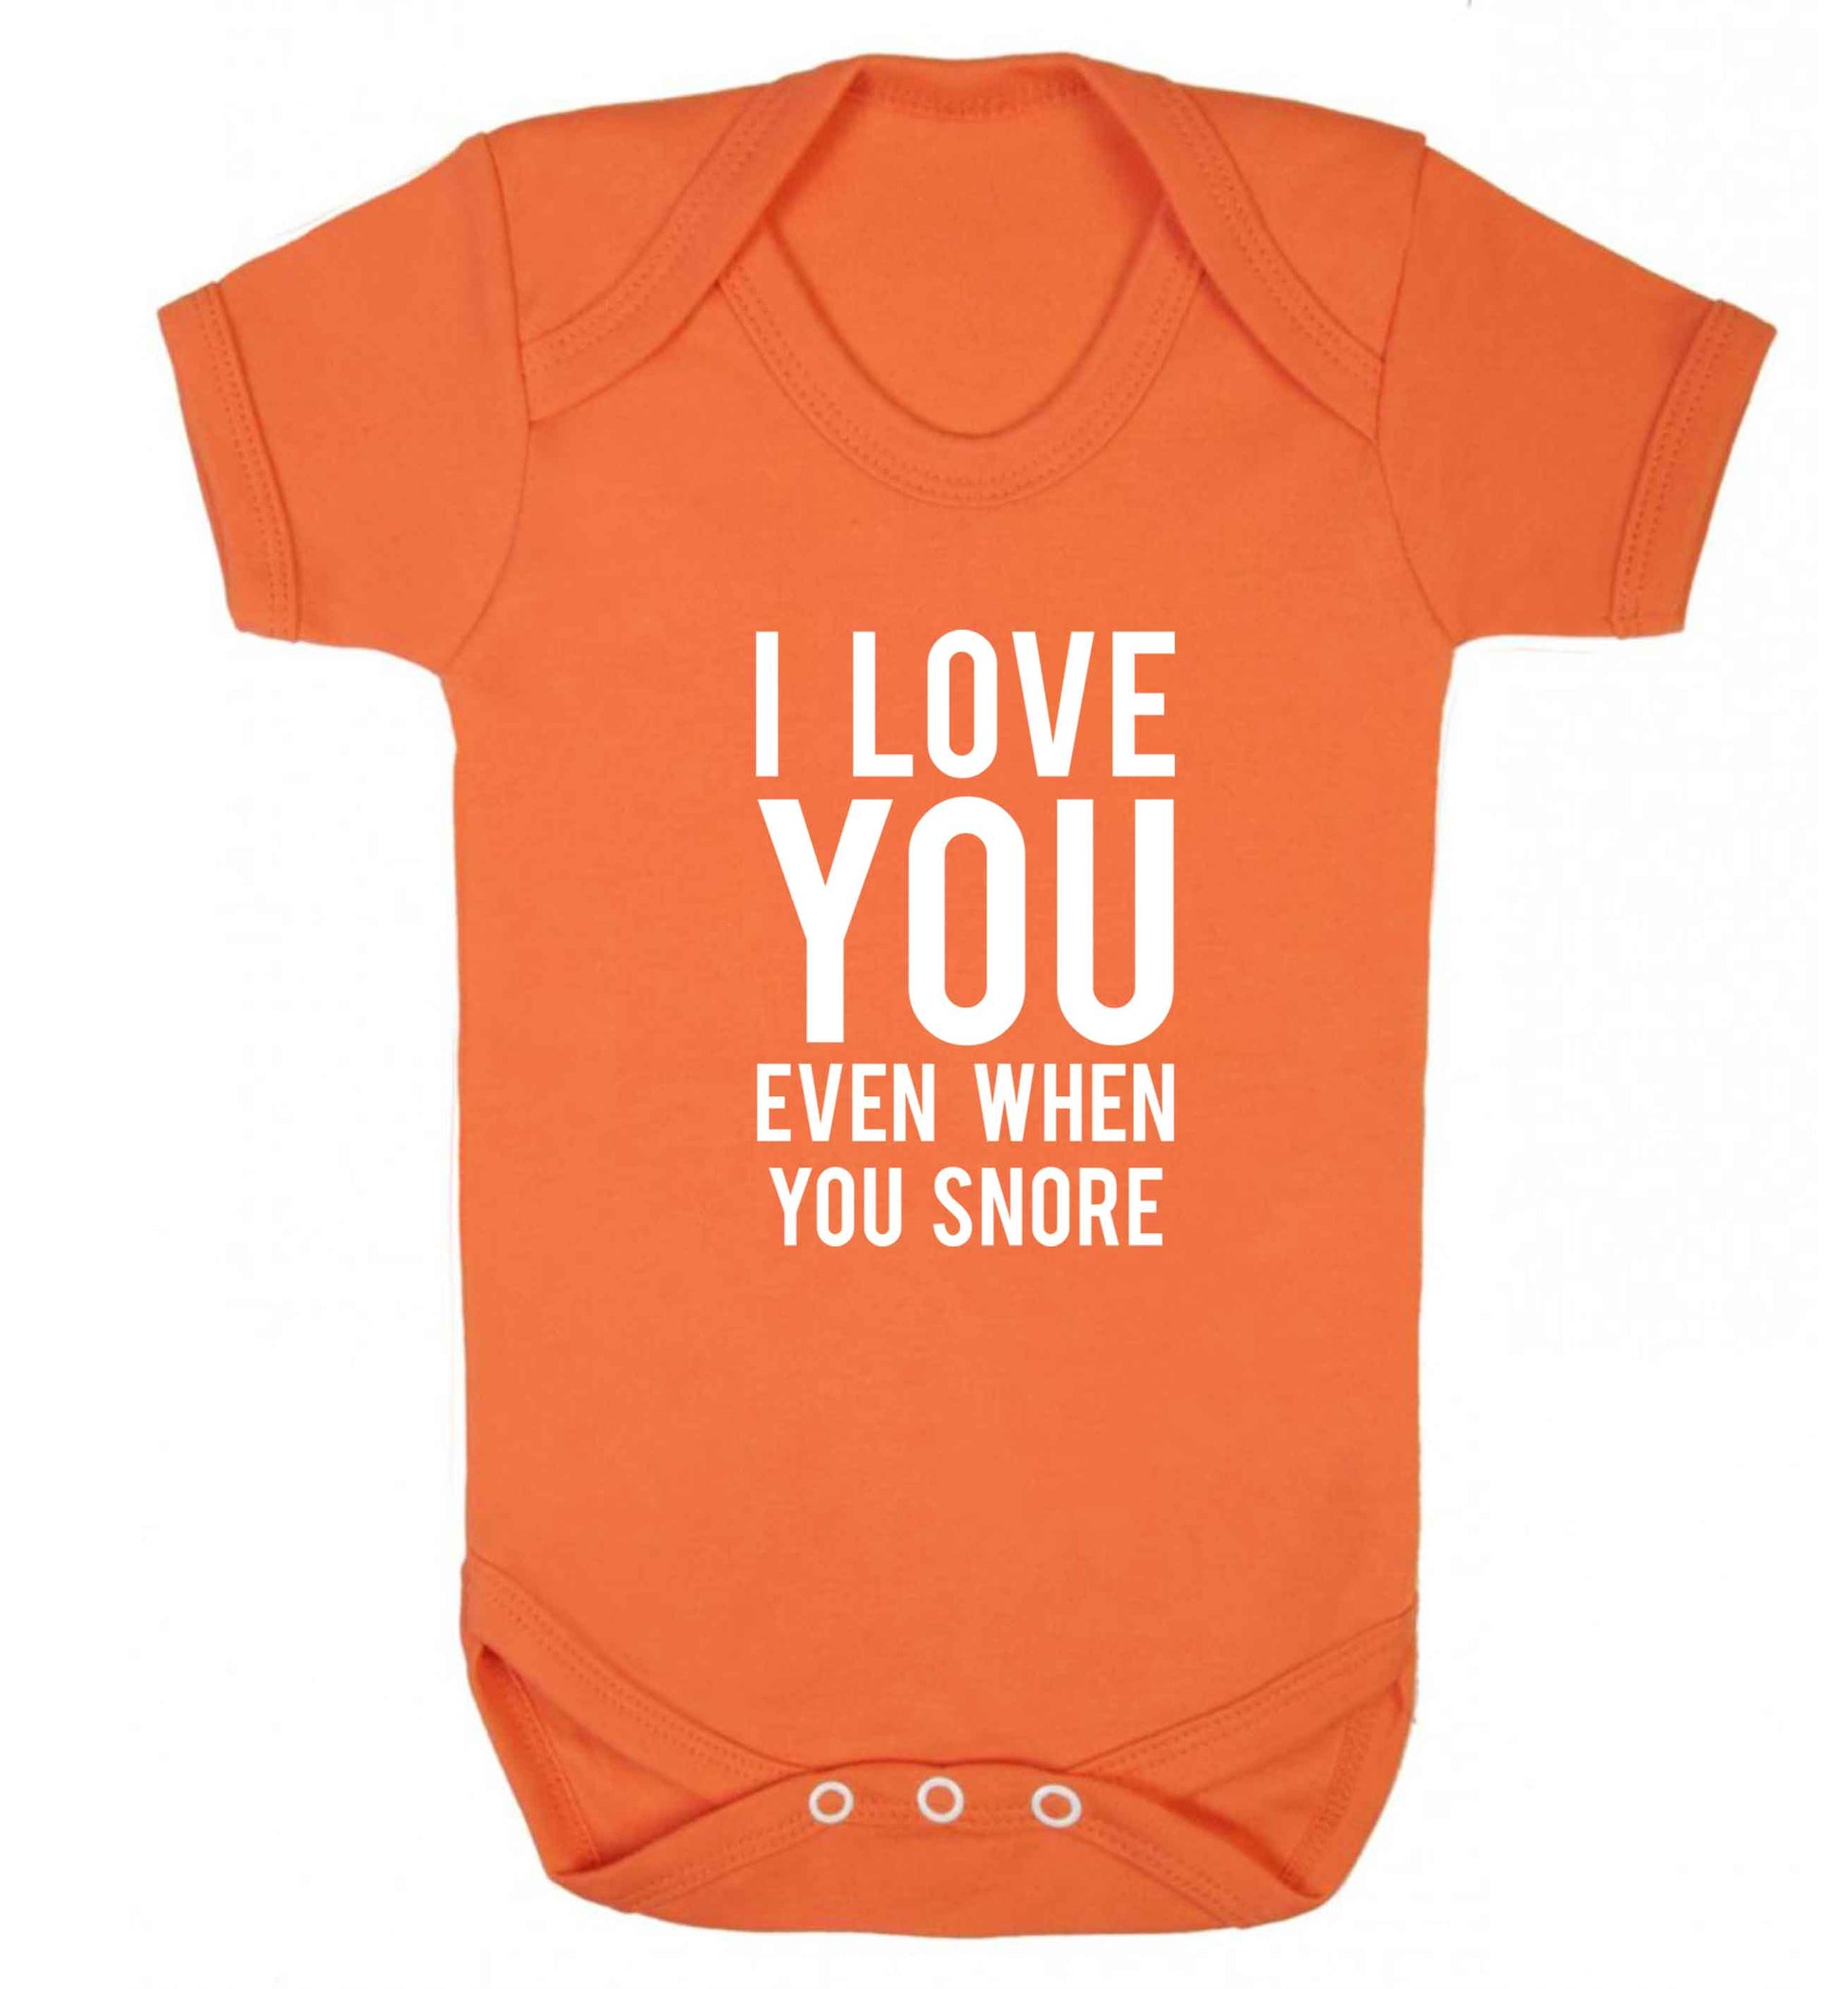 I love you even when you snore baby vest orange 18-24 months